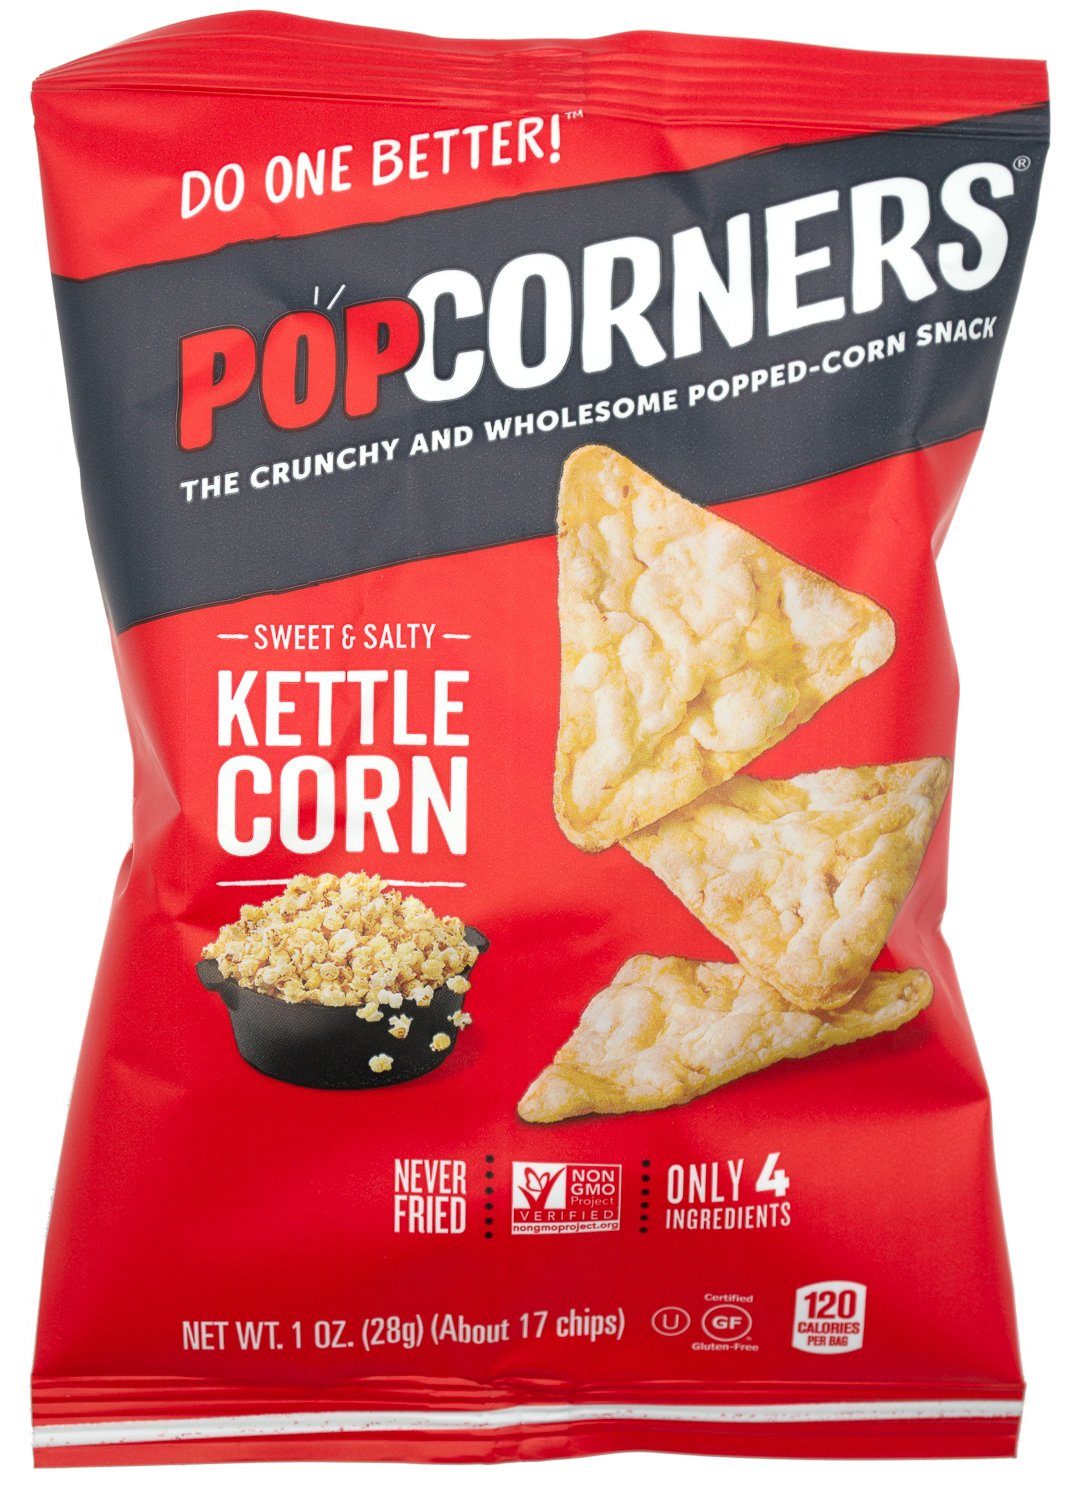 Popcorners - The Crunchy and Wholesome Popped-corn Snack Popcorners Kettle Corn 1 Ounce 